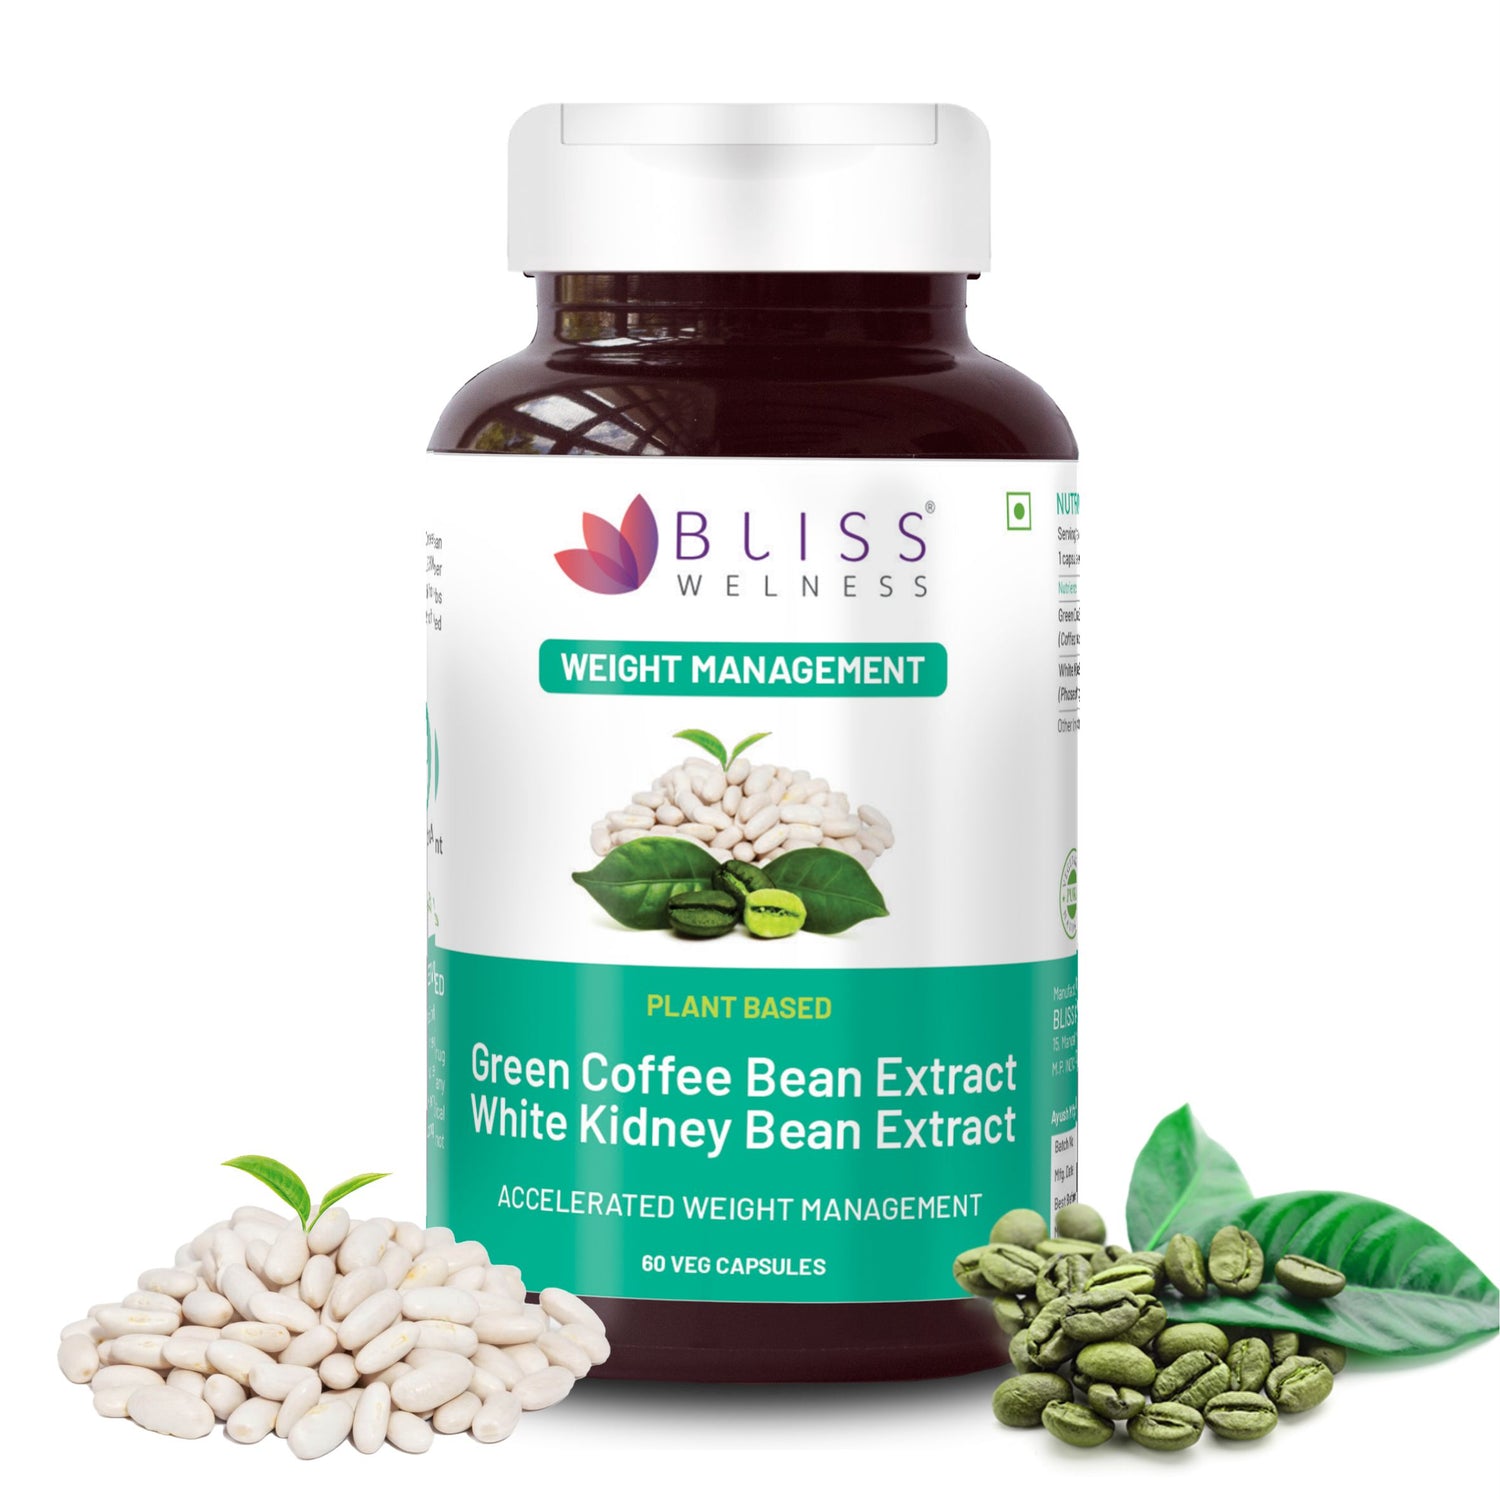 Bliss Welness Weight Management Carb Control | Green Coffee Bean Extract 50% + White Kidney Bean Extract | Carbohydrate Blocker Supplement - 60 Vegetarian Capsules